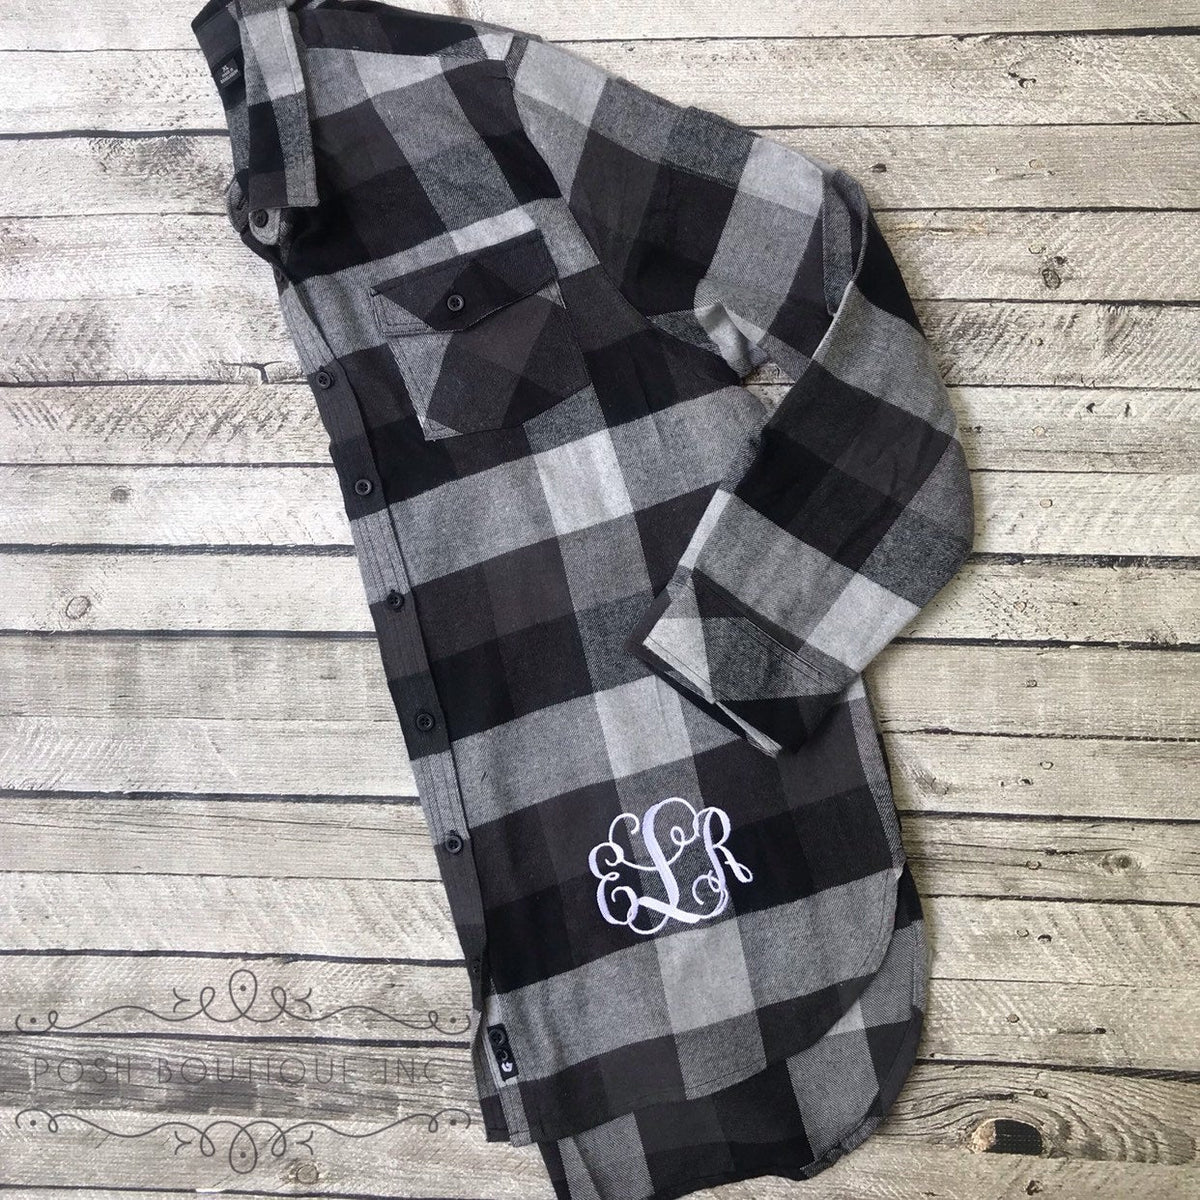 monogrammed flannel shirts for bridesmaids